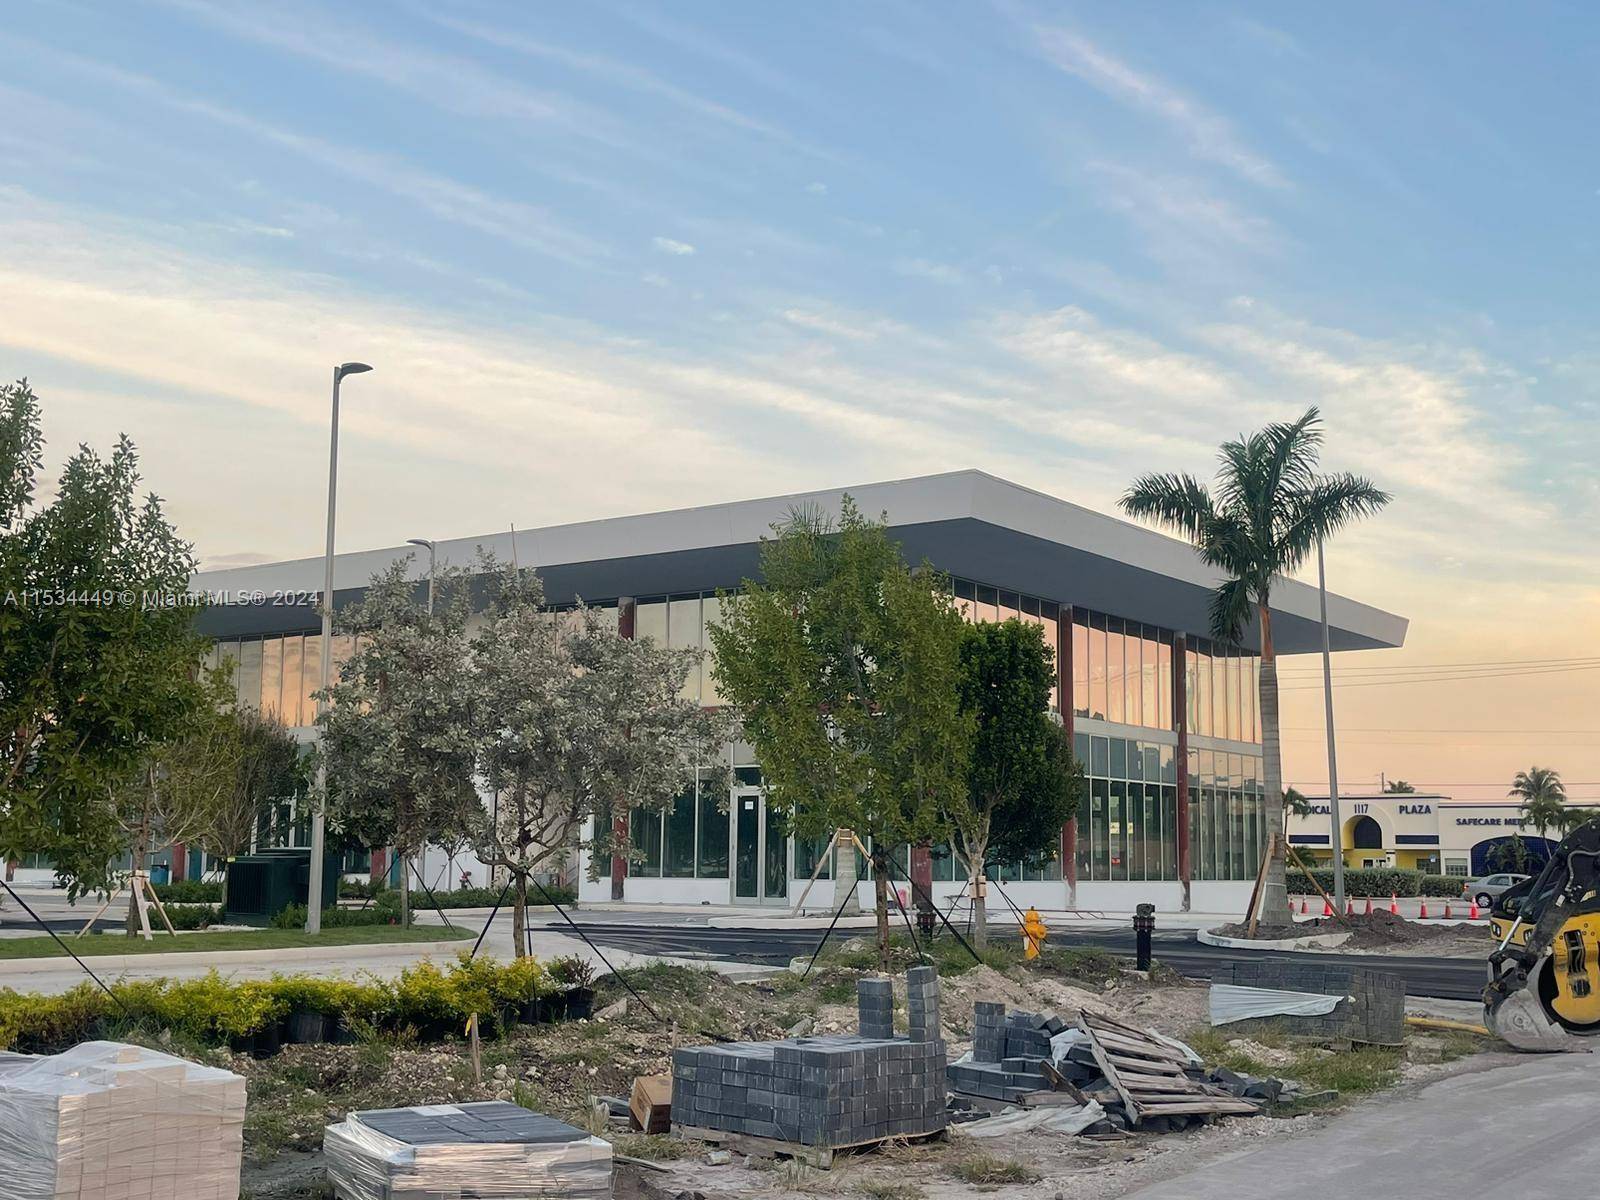 FOR SALE AVAILABLE NOW INCREDIBLE OPPORTUNITY TO BUY THE BRAND NEW COMMERCIAL SPACE, BUILD YOUR DREAM OFFICE, SHOP, RESTAURANT AT THE CITY'S ARTHERY HALLANDALE BEACH BLVD.